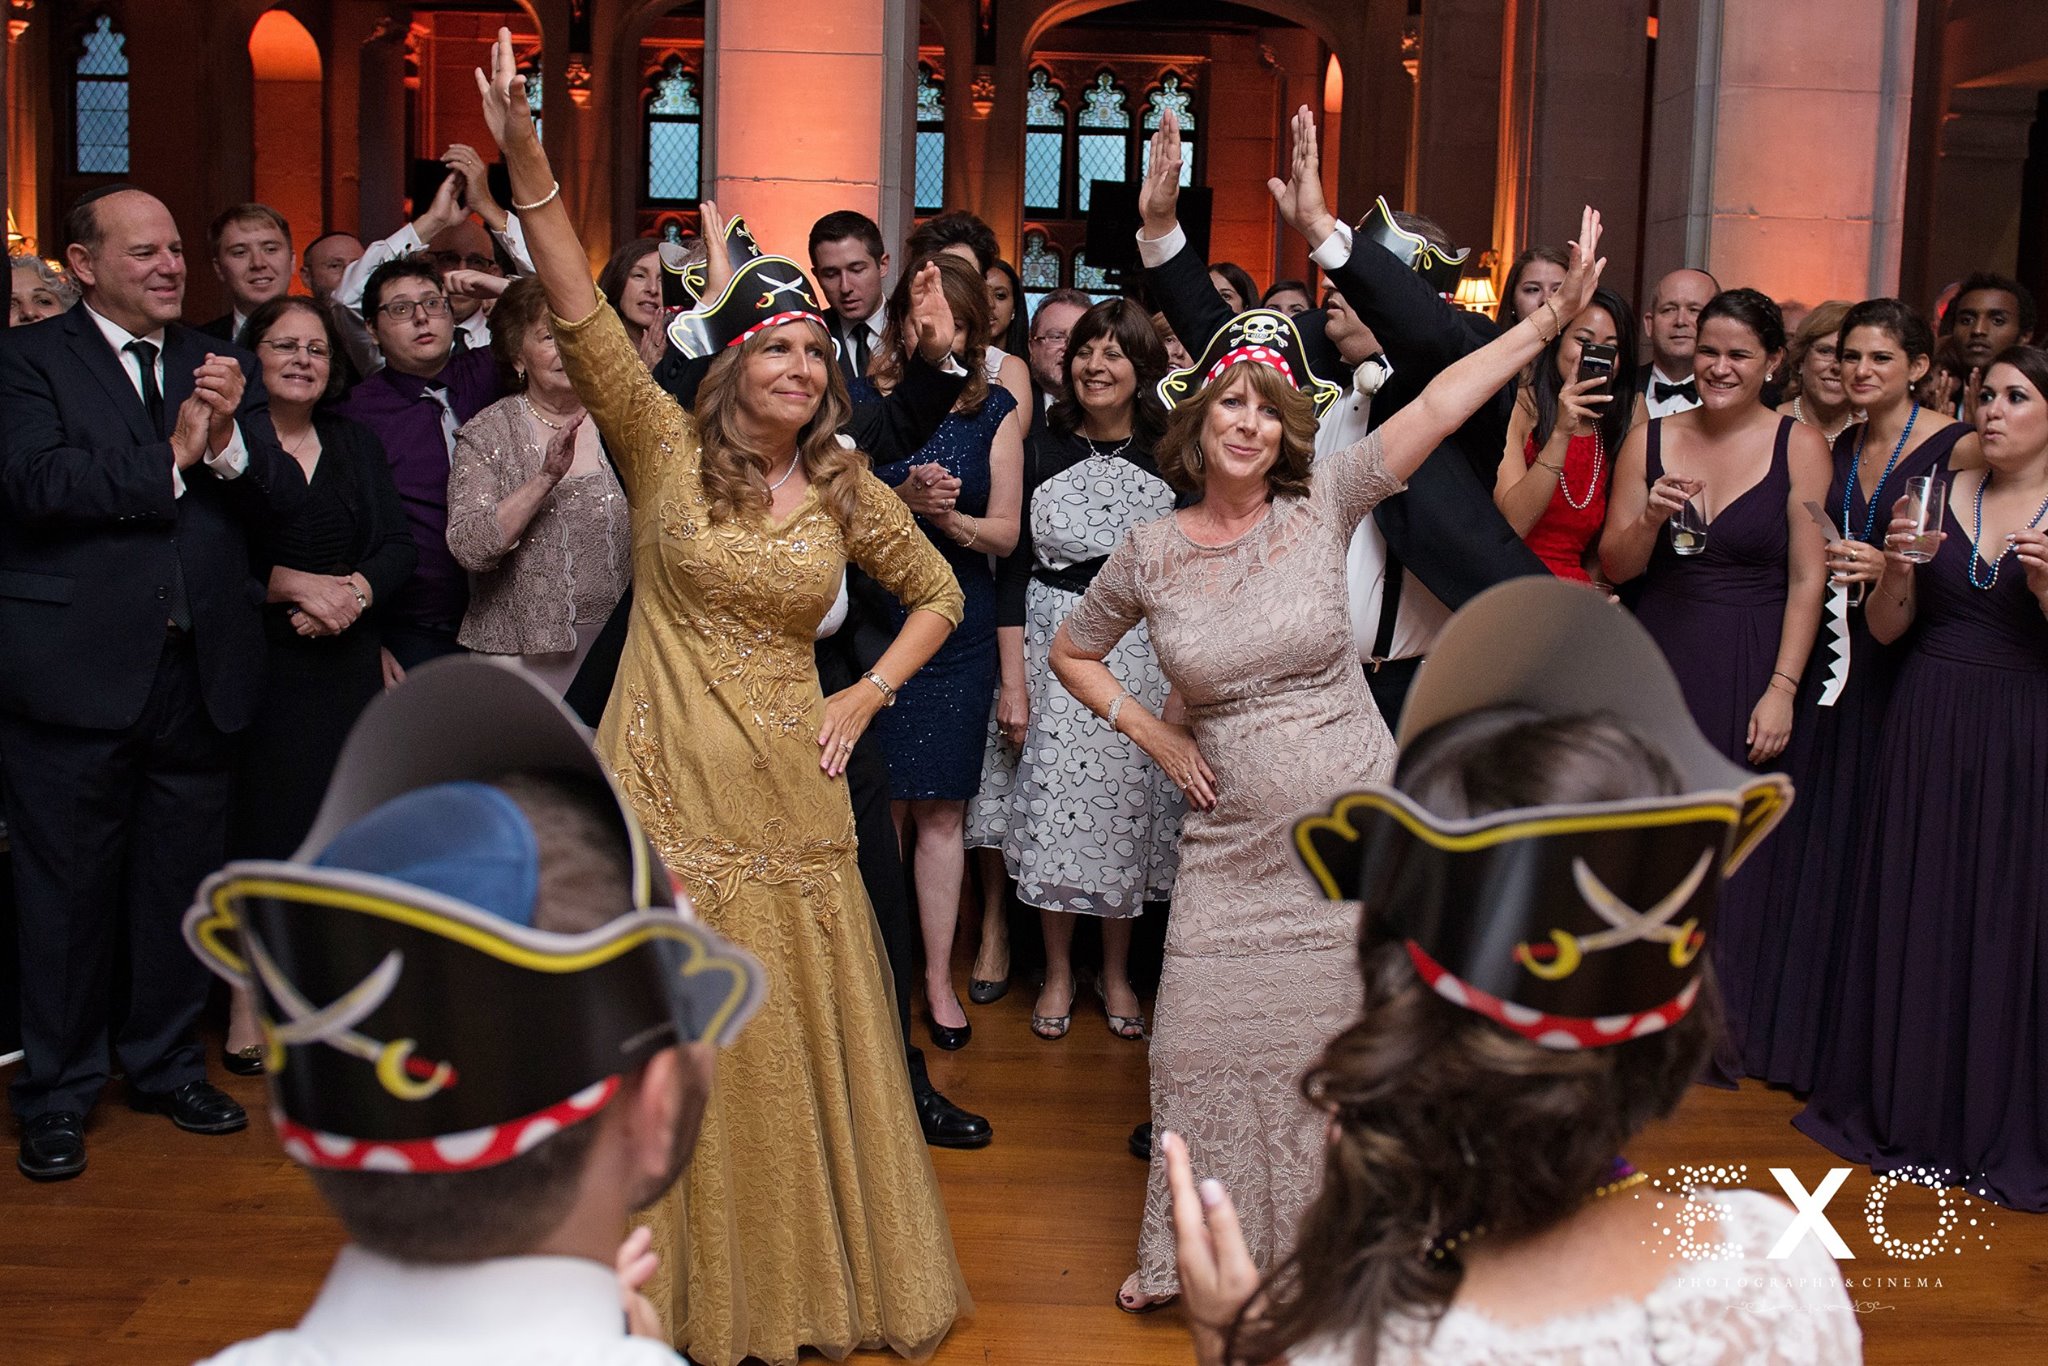 mothers of the bride and groom dancing at reception